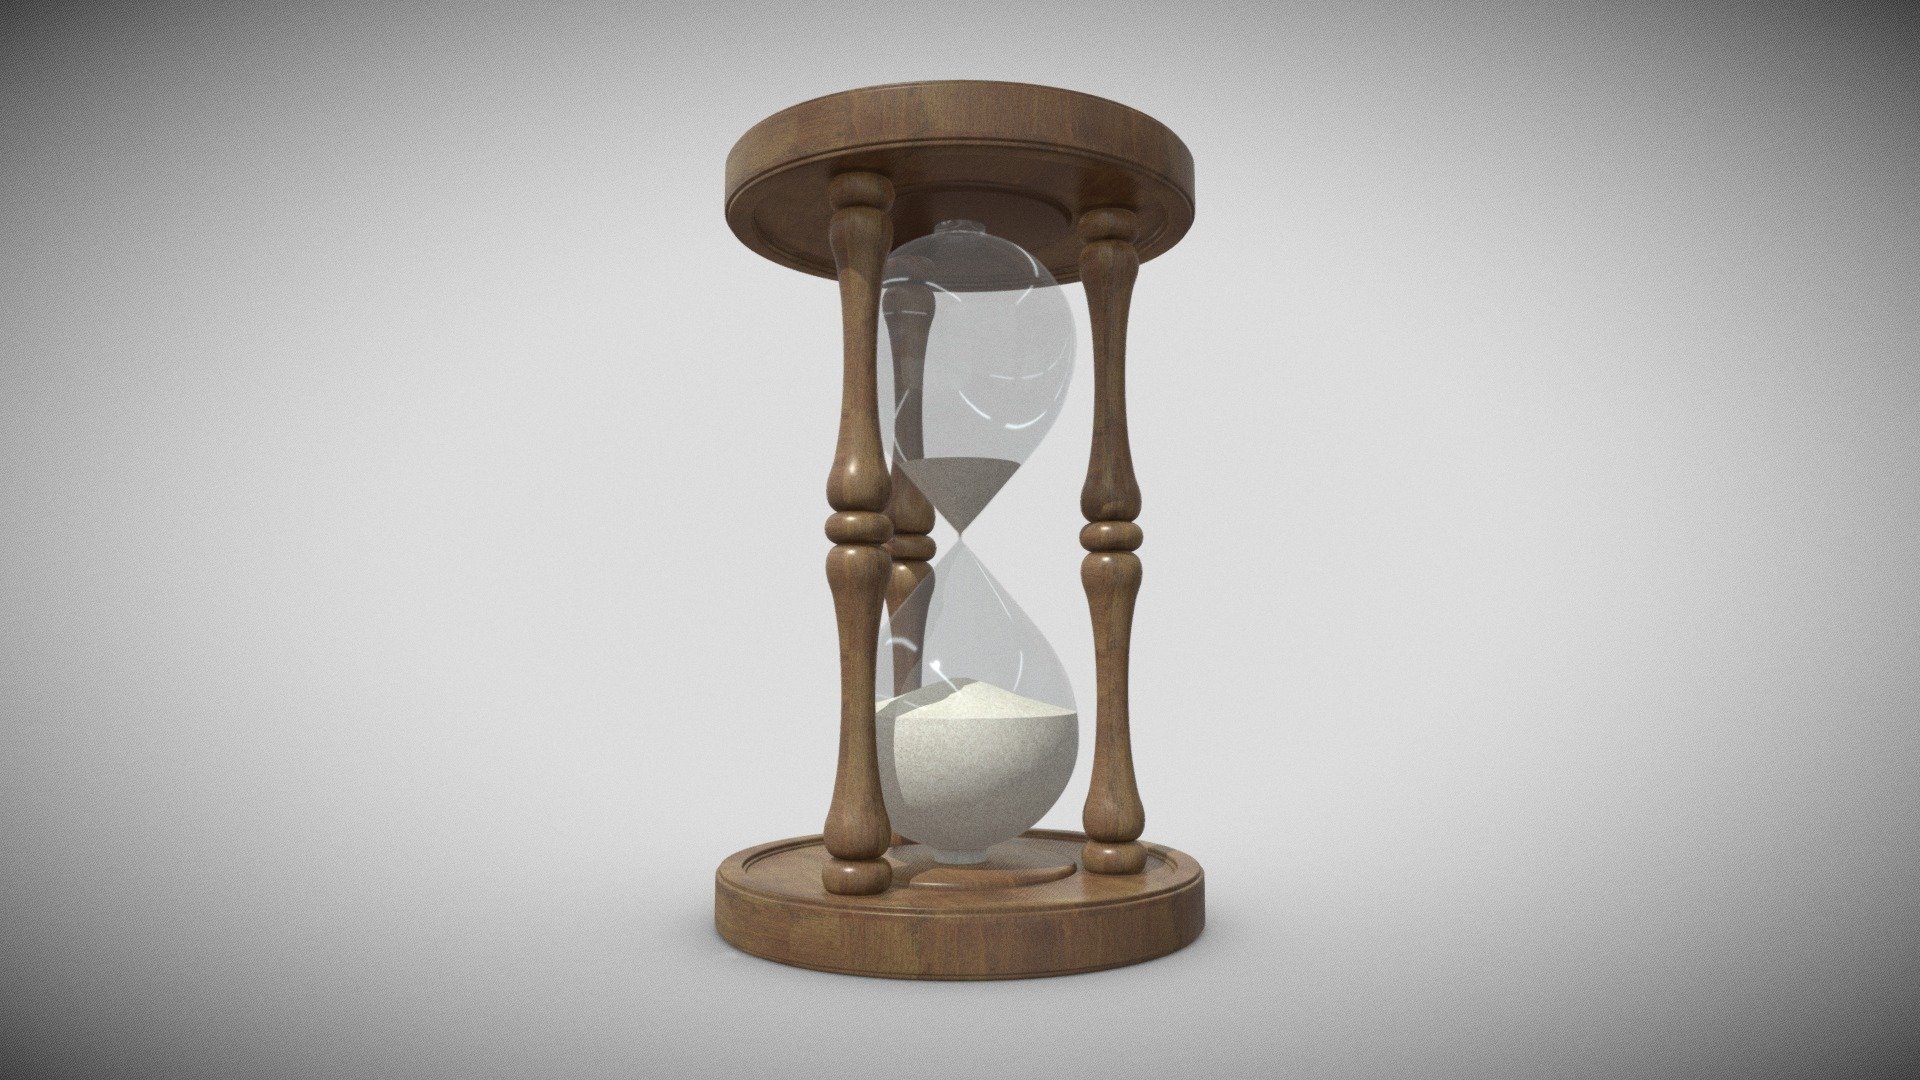 The 3D Hourglass Model can be an impressive element for your projects.
realistic appearance, low polygon, realistic coatings, fast rendering 3d model